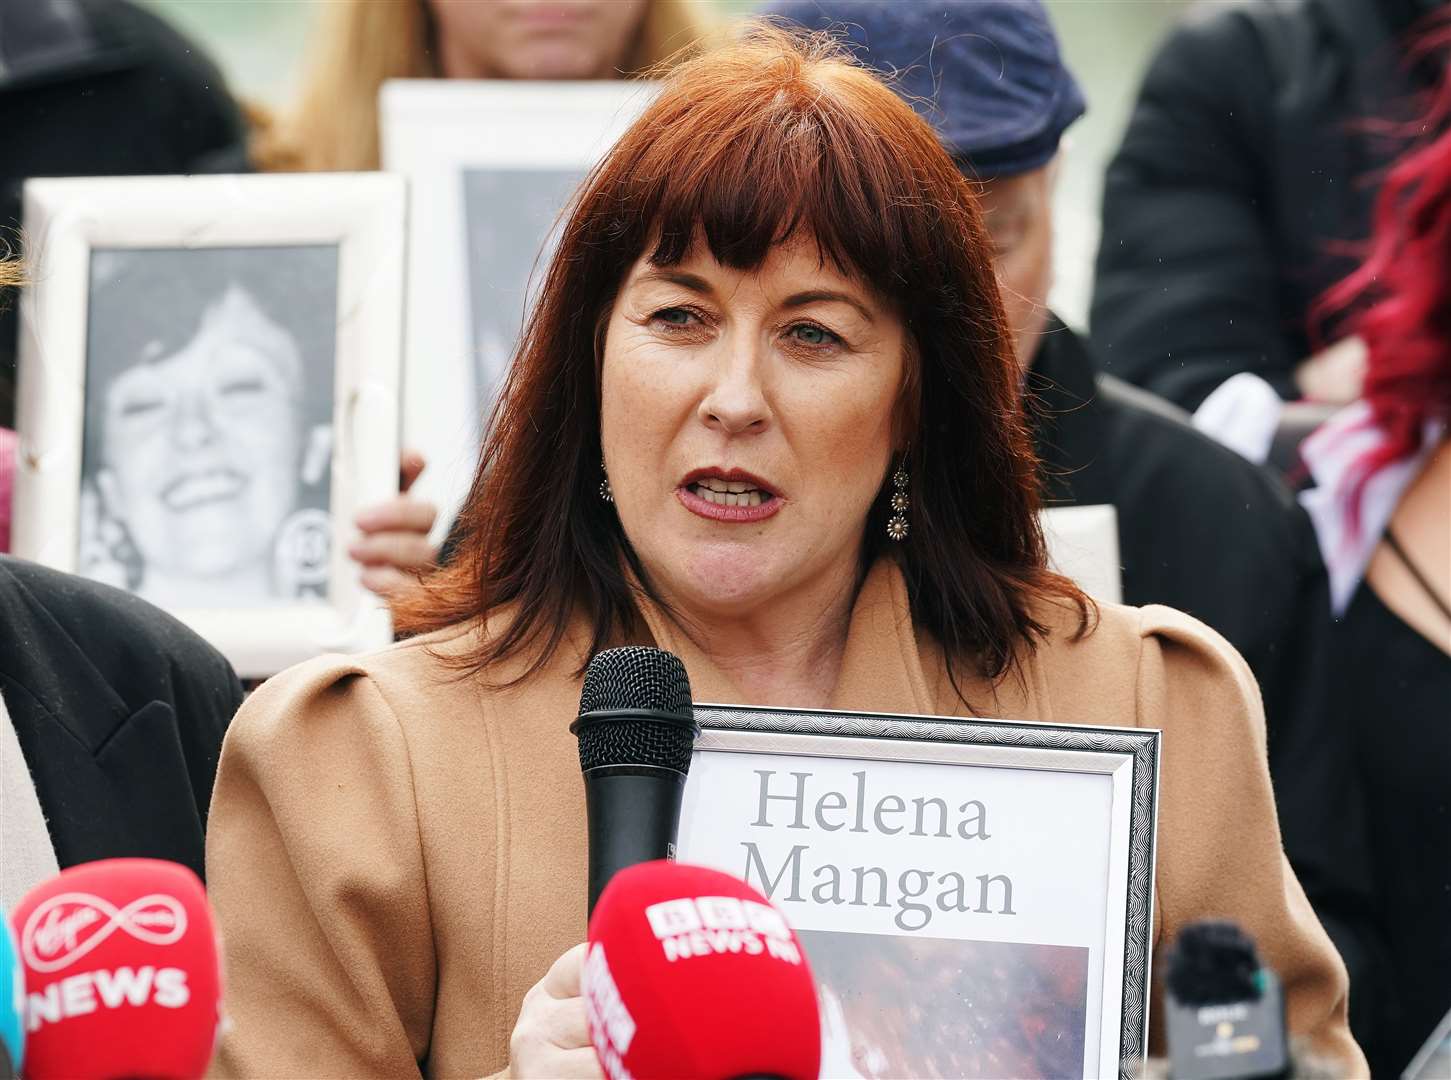 Samantha Mangan, whose mother Helena died, speaks to the media as survivors, family members and supporters gather in the Garden of Remembrance in Dublin (Brian Lawless/PA)